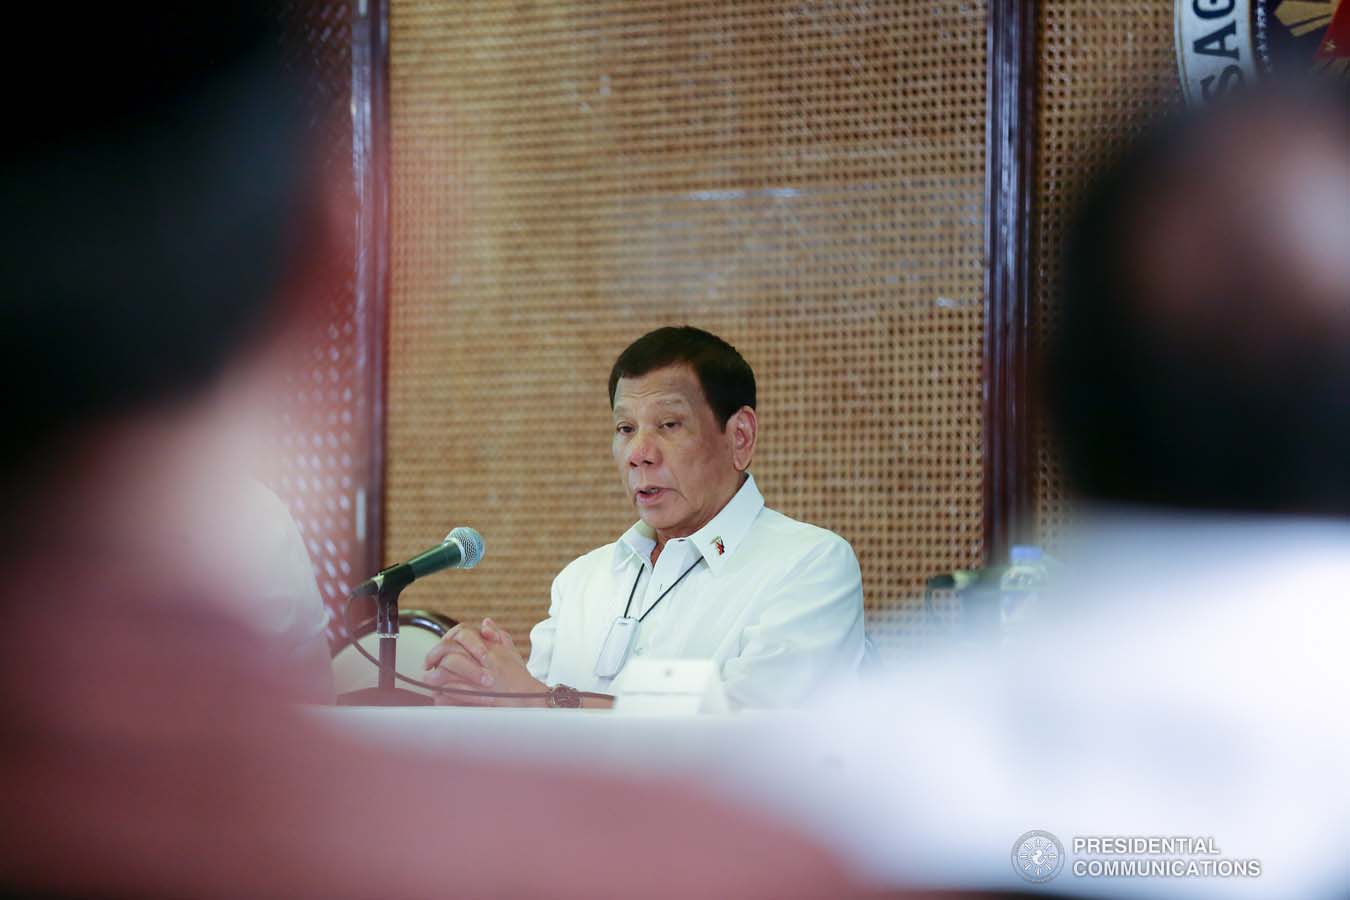 President Rodrigo Roa Duterte holds a meeting to discuss the updates on the Marawi Rehabilitation efforts at the Malacañan Palace on March 4, 2020. ALFRED FRIAS/PRESIDENTIAL PHOTO